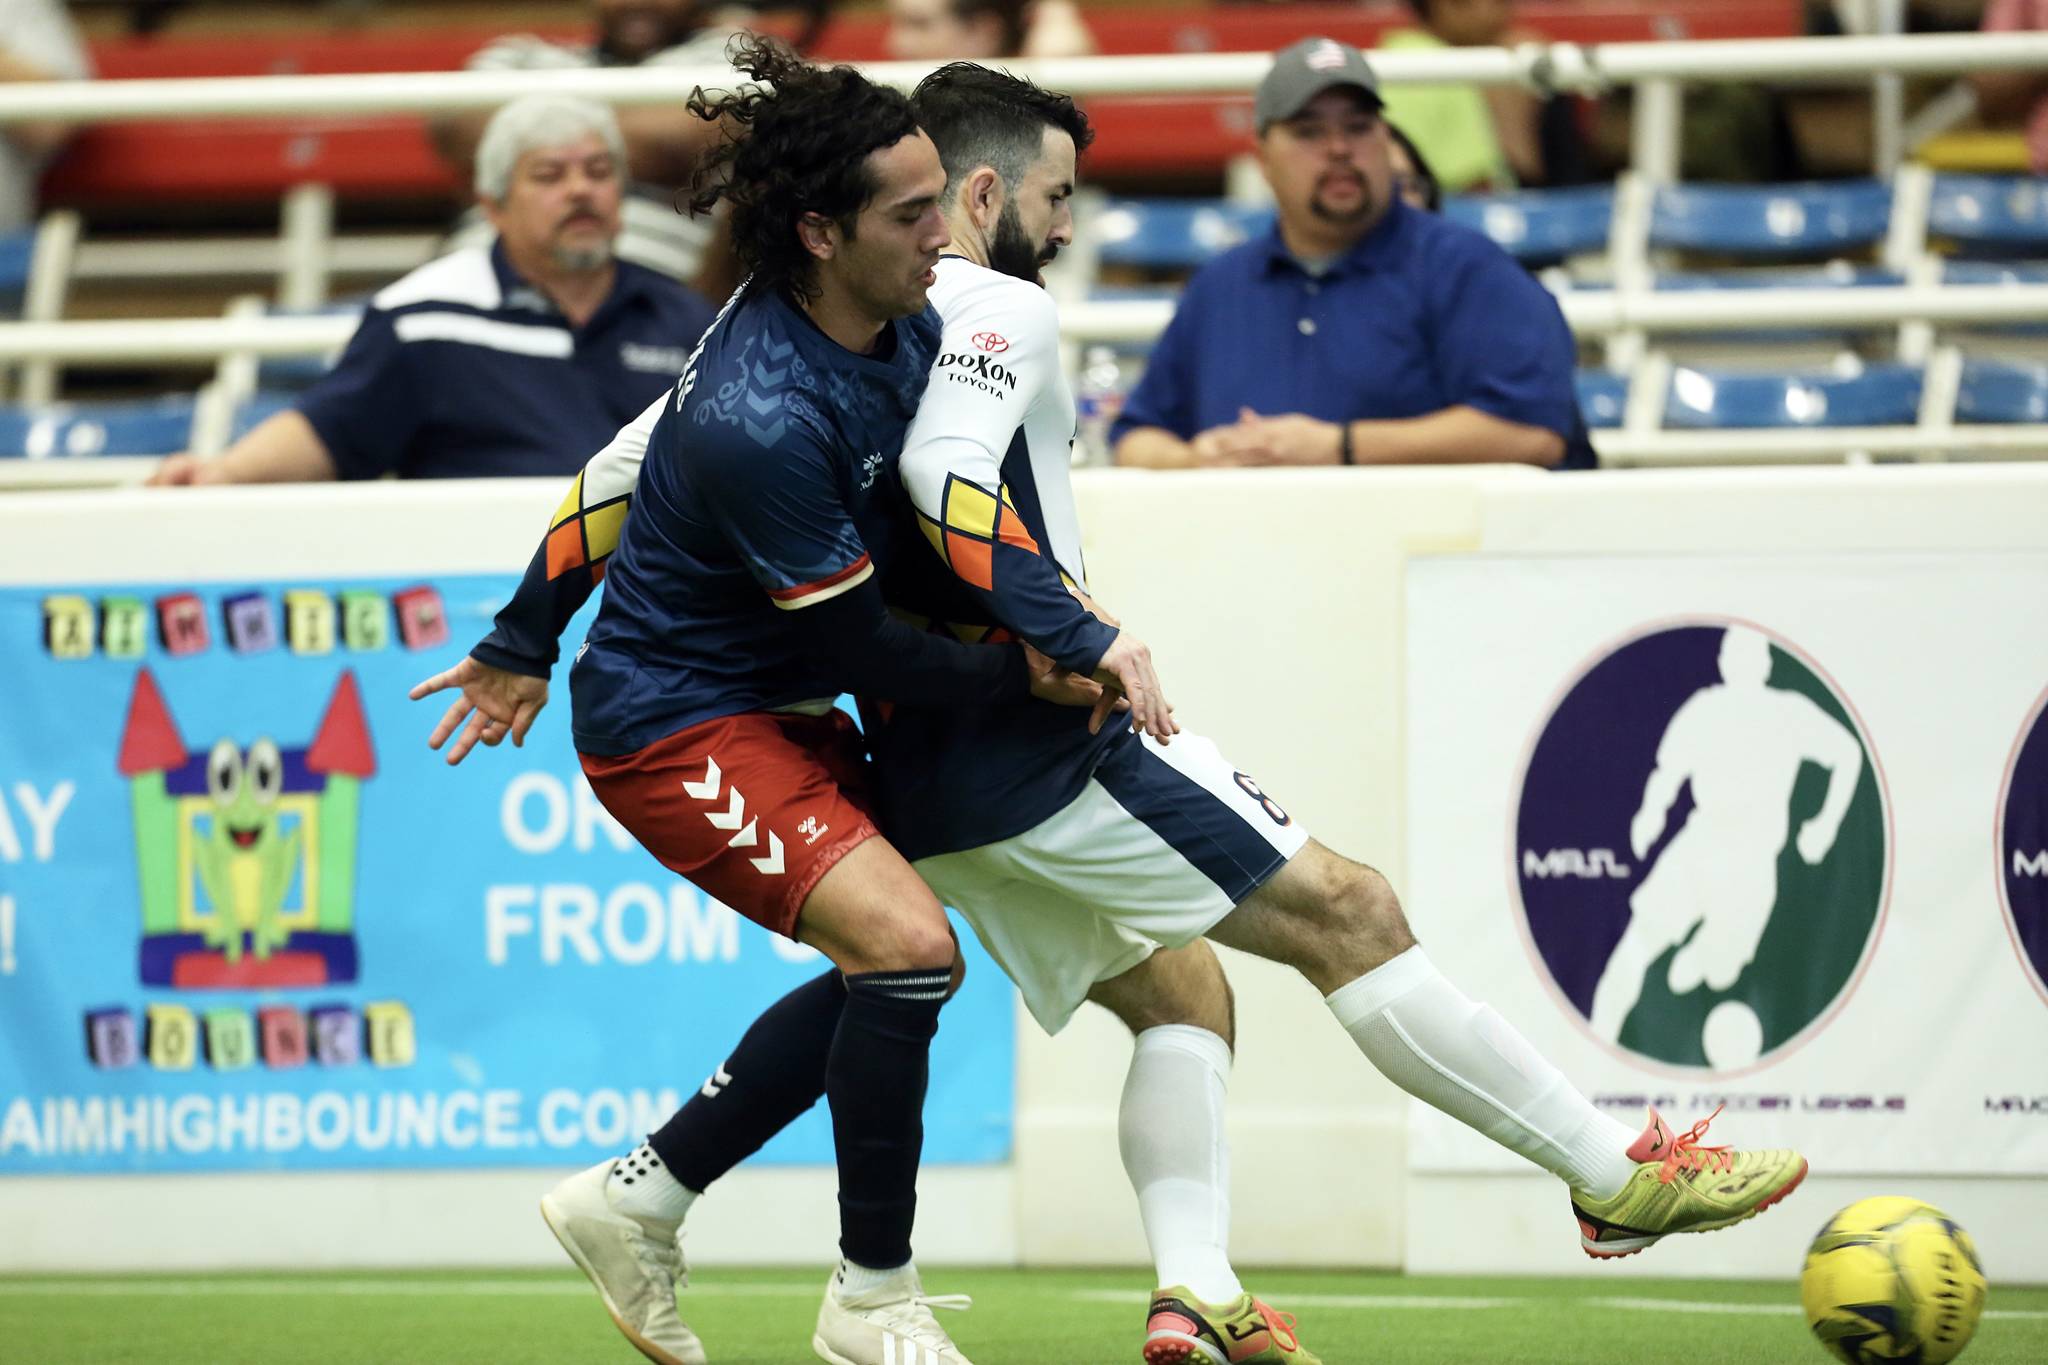 Alex Caceres fends off a Mesquite Outlaws defender during Tacoma’s 5-2 loss on Sunday. COURTESY PHOTO, MASL Media/Mesquite Outlaws